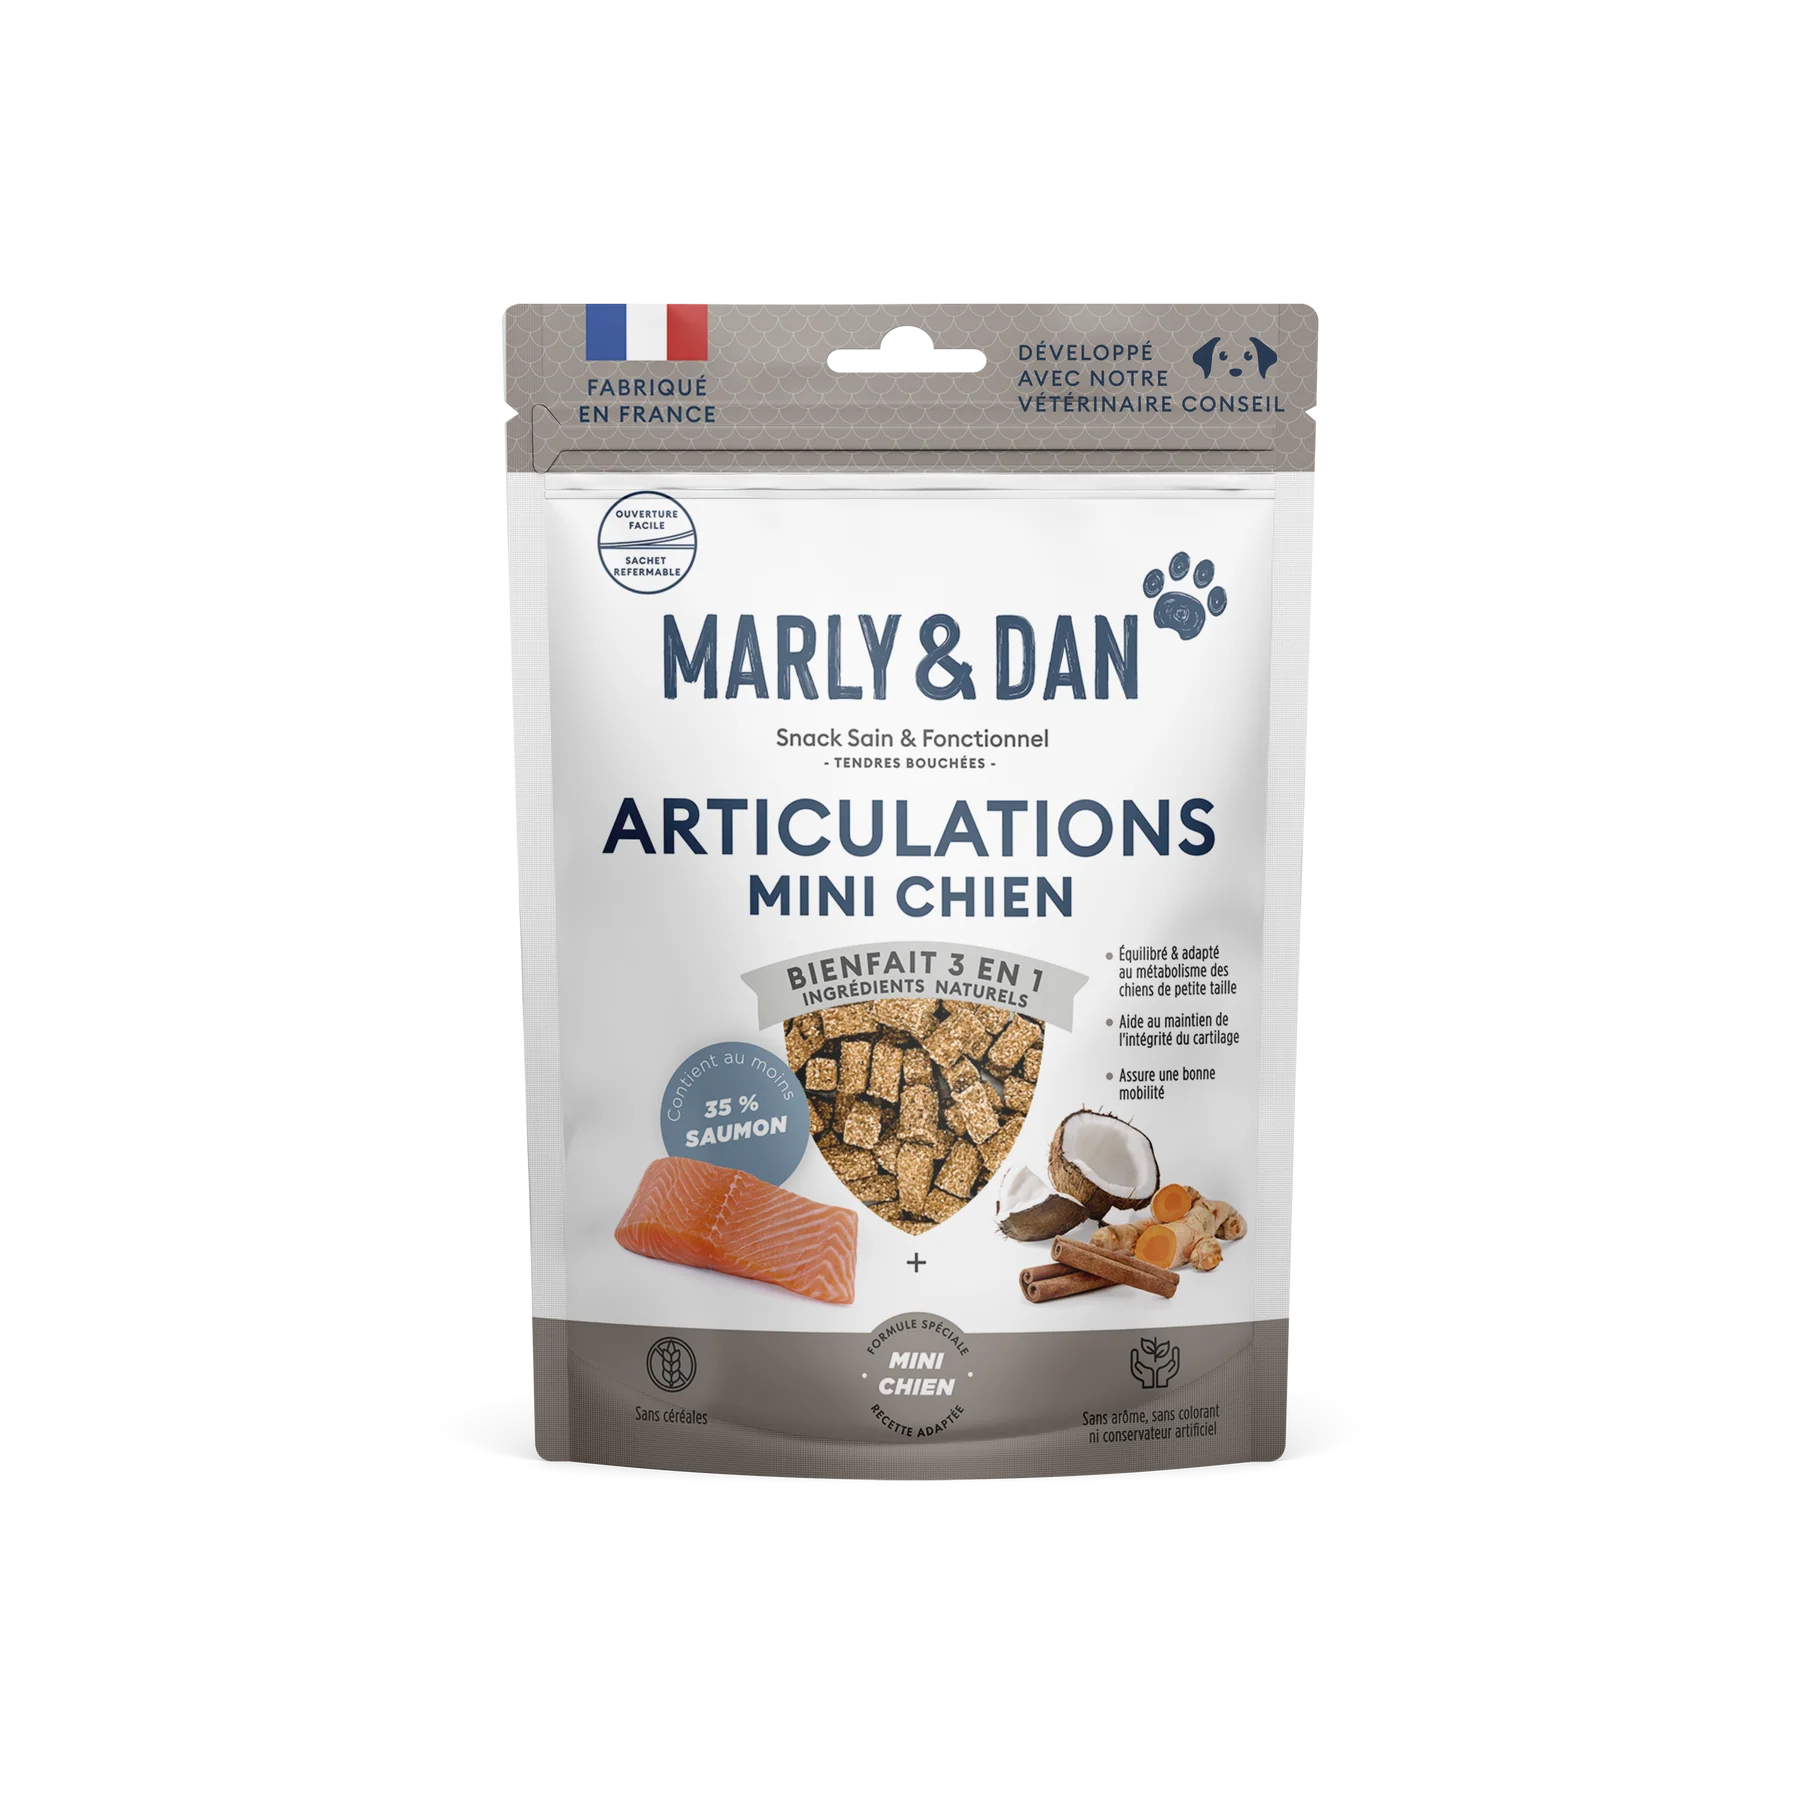 MARLY & DAN SOFT & CHEWY HIP&JOINT MINI DOG 50 G CAJA 10 UDS (M&D 4100525)